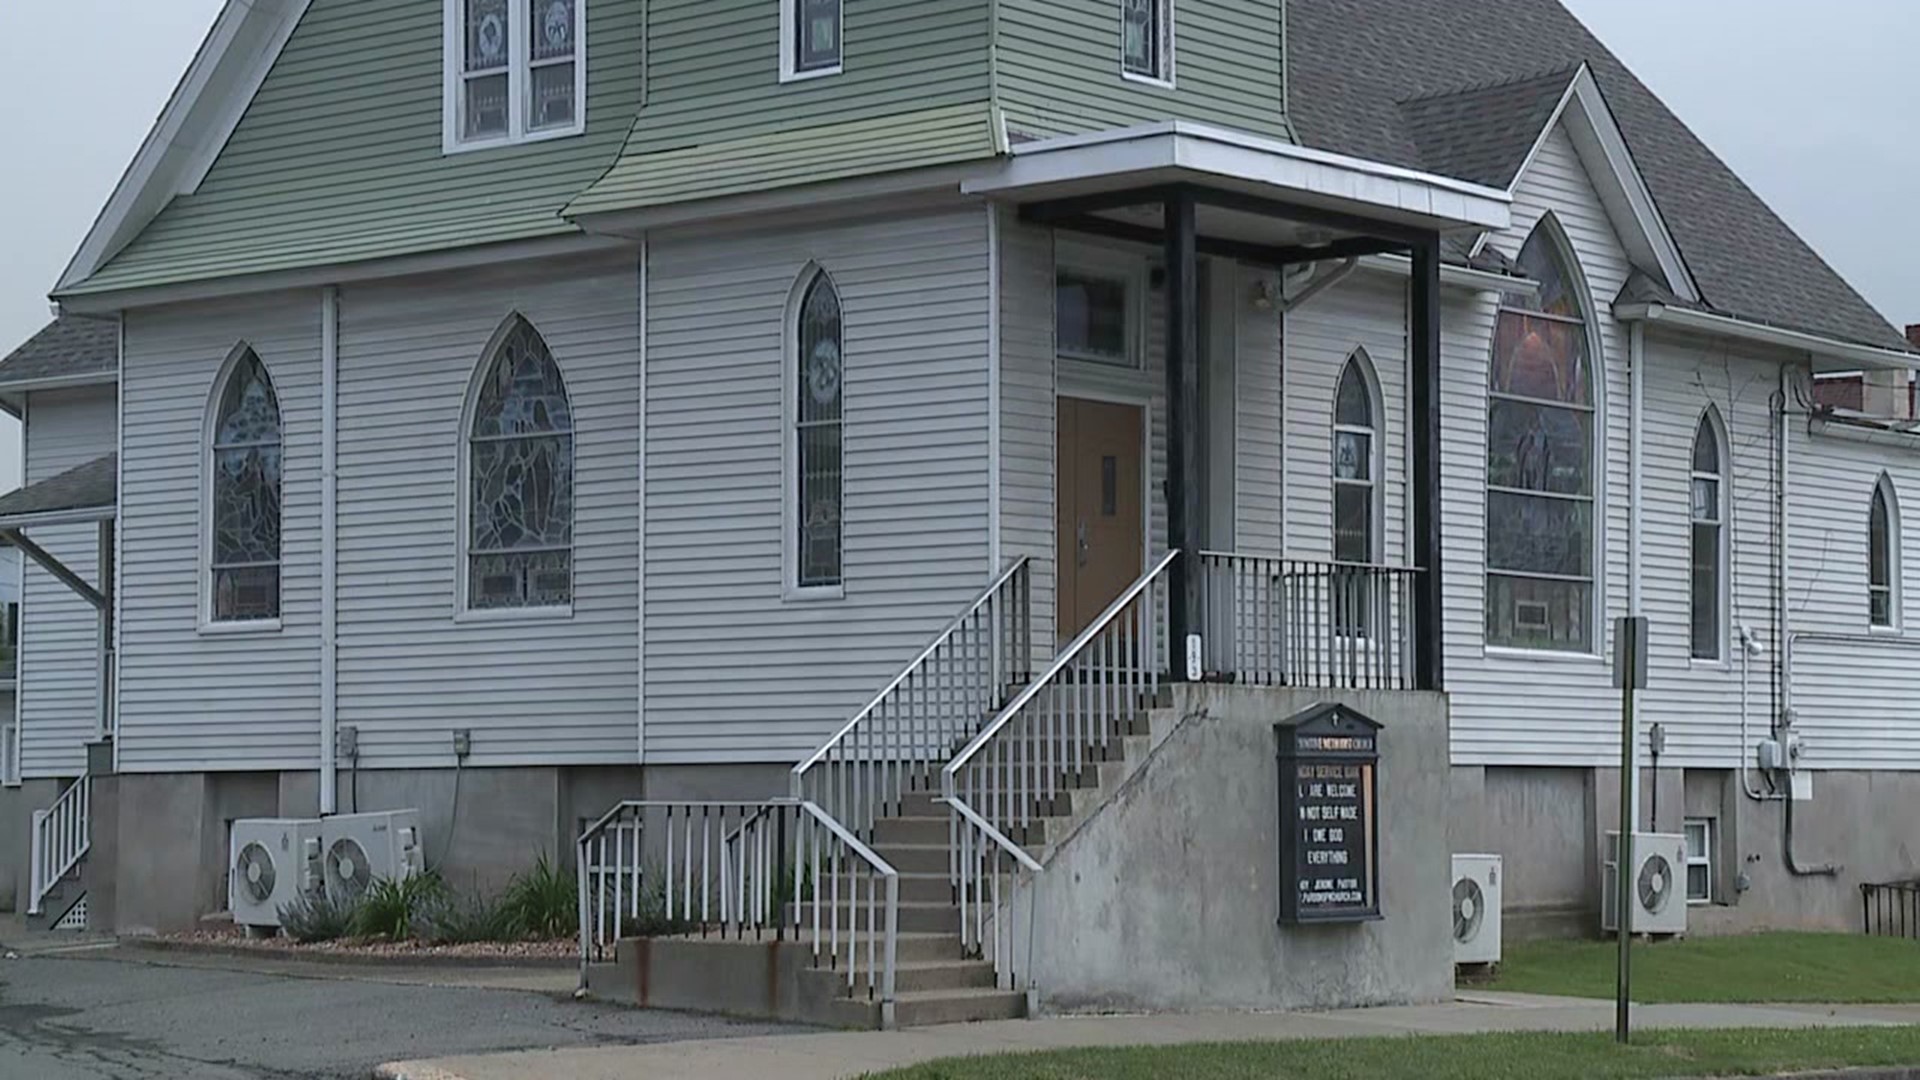 Police in Wilkes-Barre are looking for the vandals who damaged the Primitive Methodist Church over the weekend.